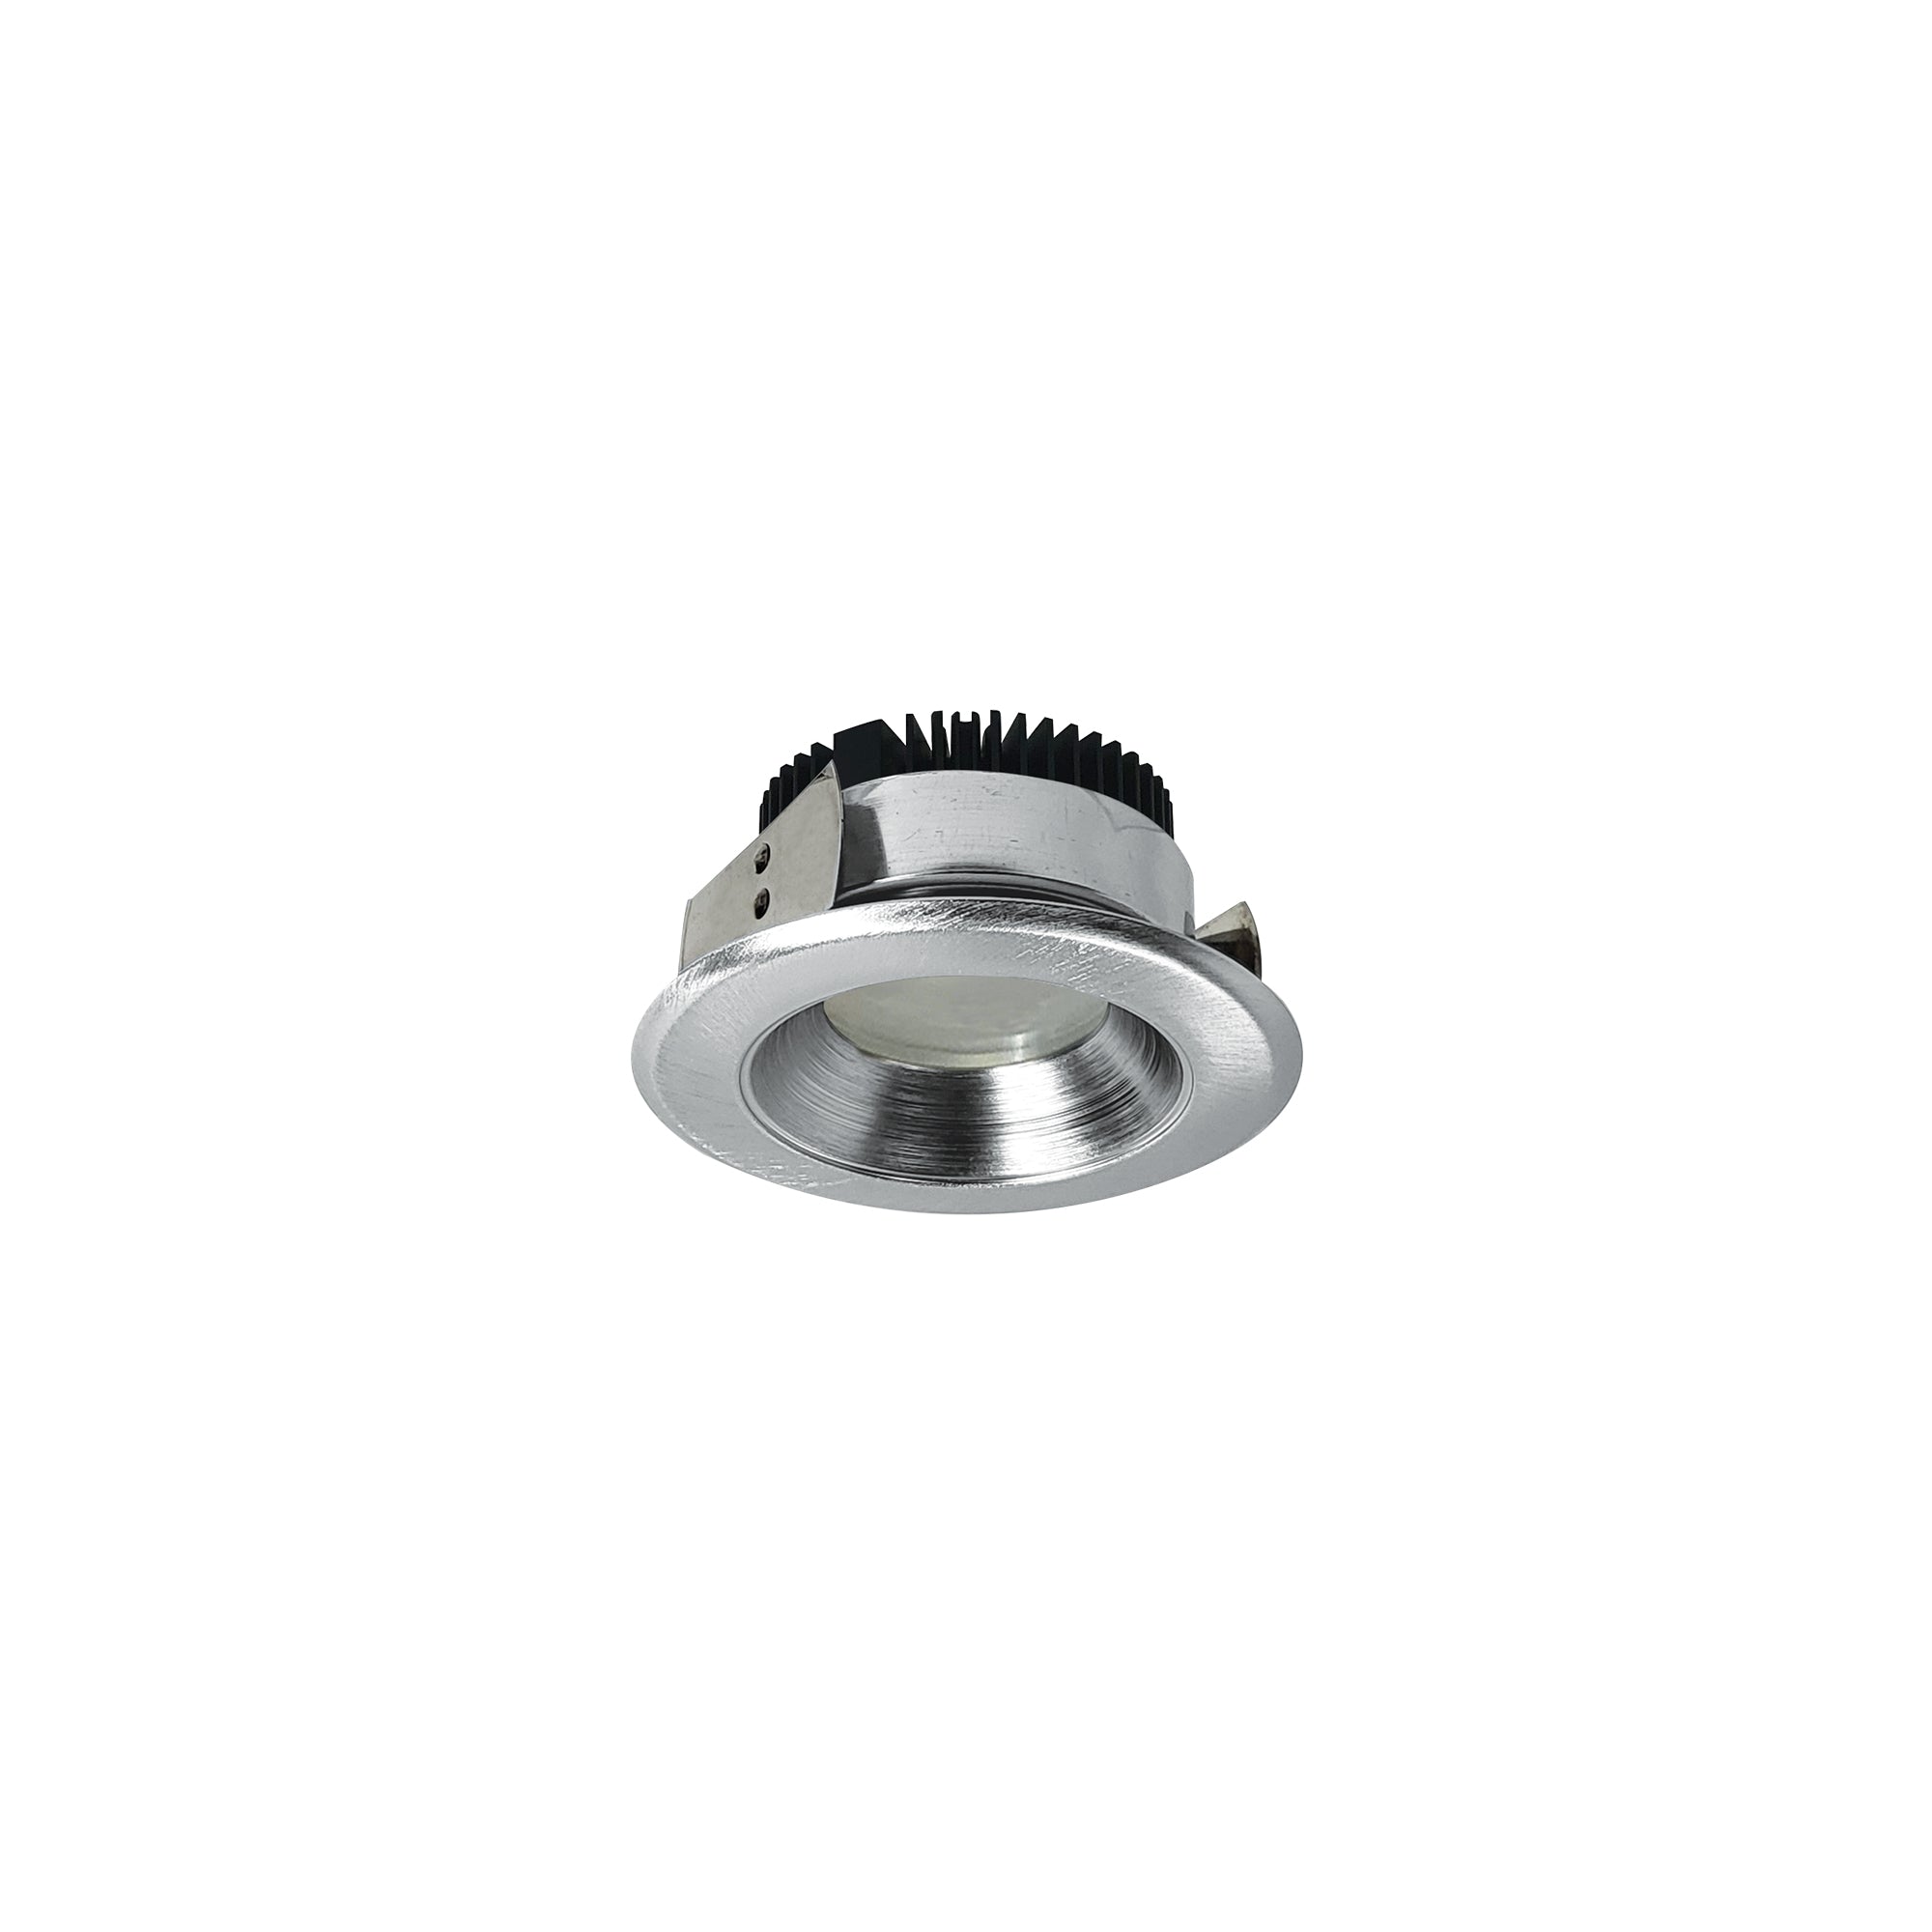 Nora Lighting NRM2-411L0930SNN - Recessed - 4 Inch Marquise II Round Reflector, 900lm, 3000K, Spot, Natural Metal